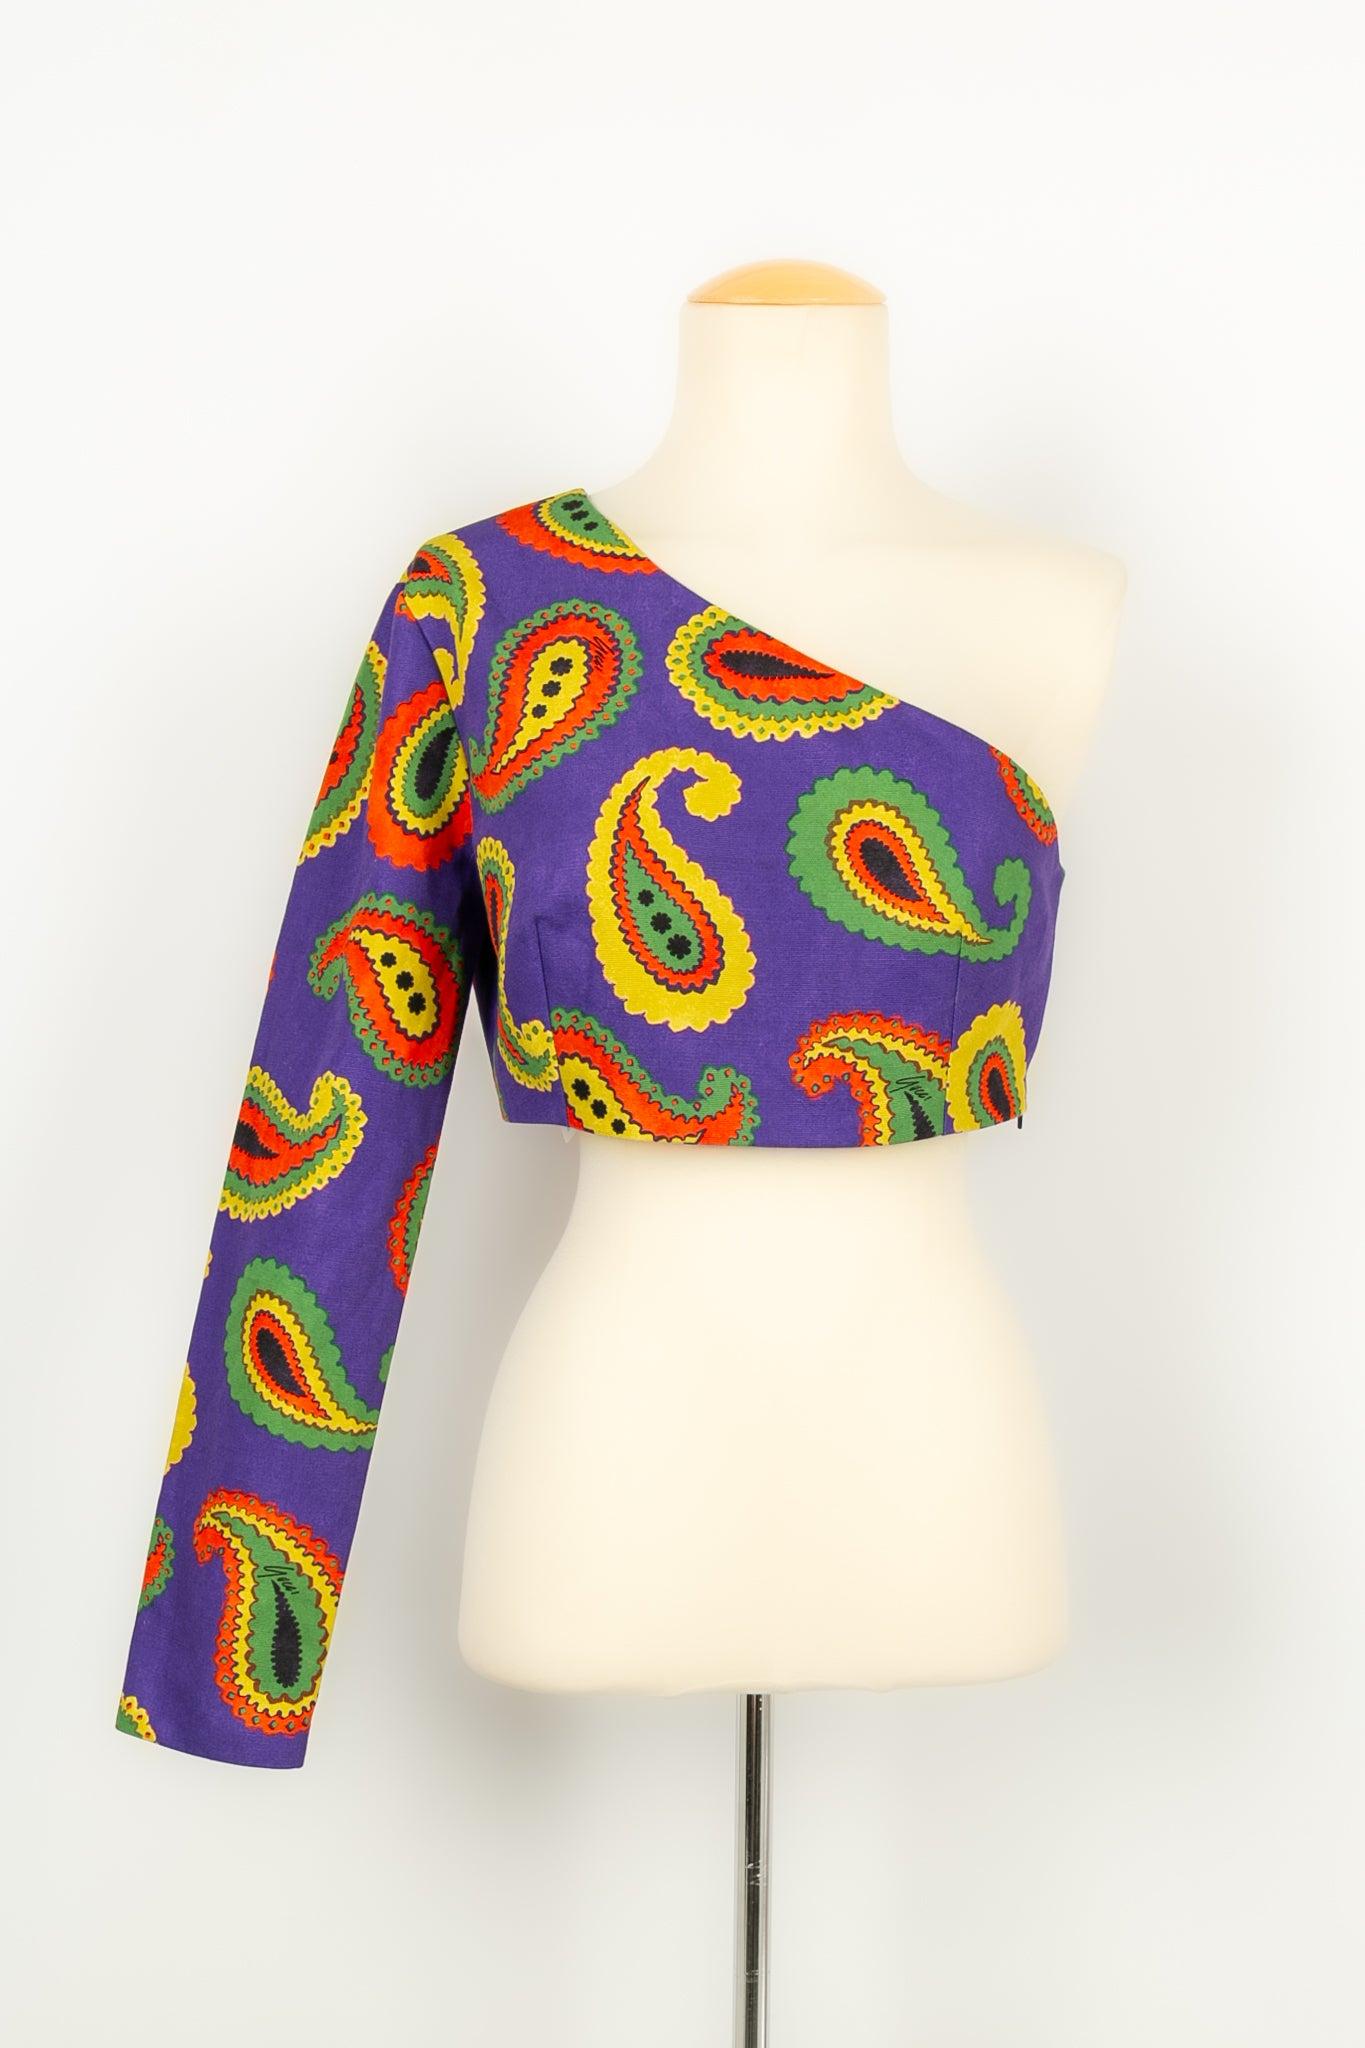 Gucci - (Made in Italy) Set composed of a short asymmetrical top and pants in cotton printed with psychedelic patterns. Size 42IT. 2021 Collection.

Additional information:
Condition: Very good condition
Dimensions: Top: Chest: 44 cm - Sleeve